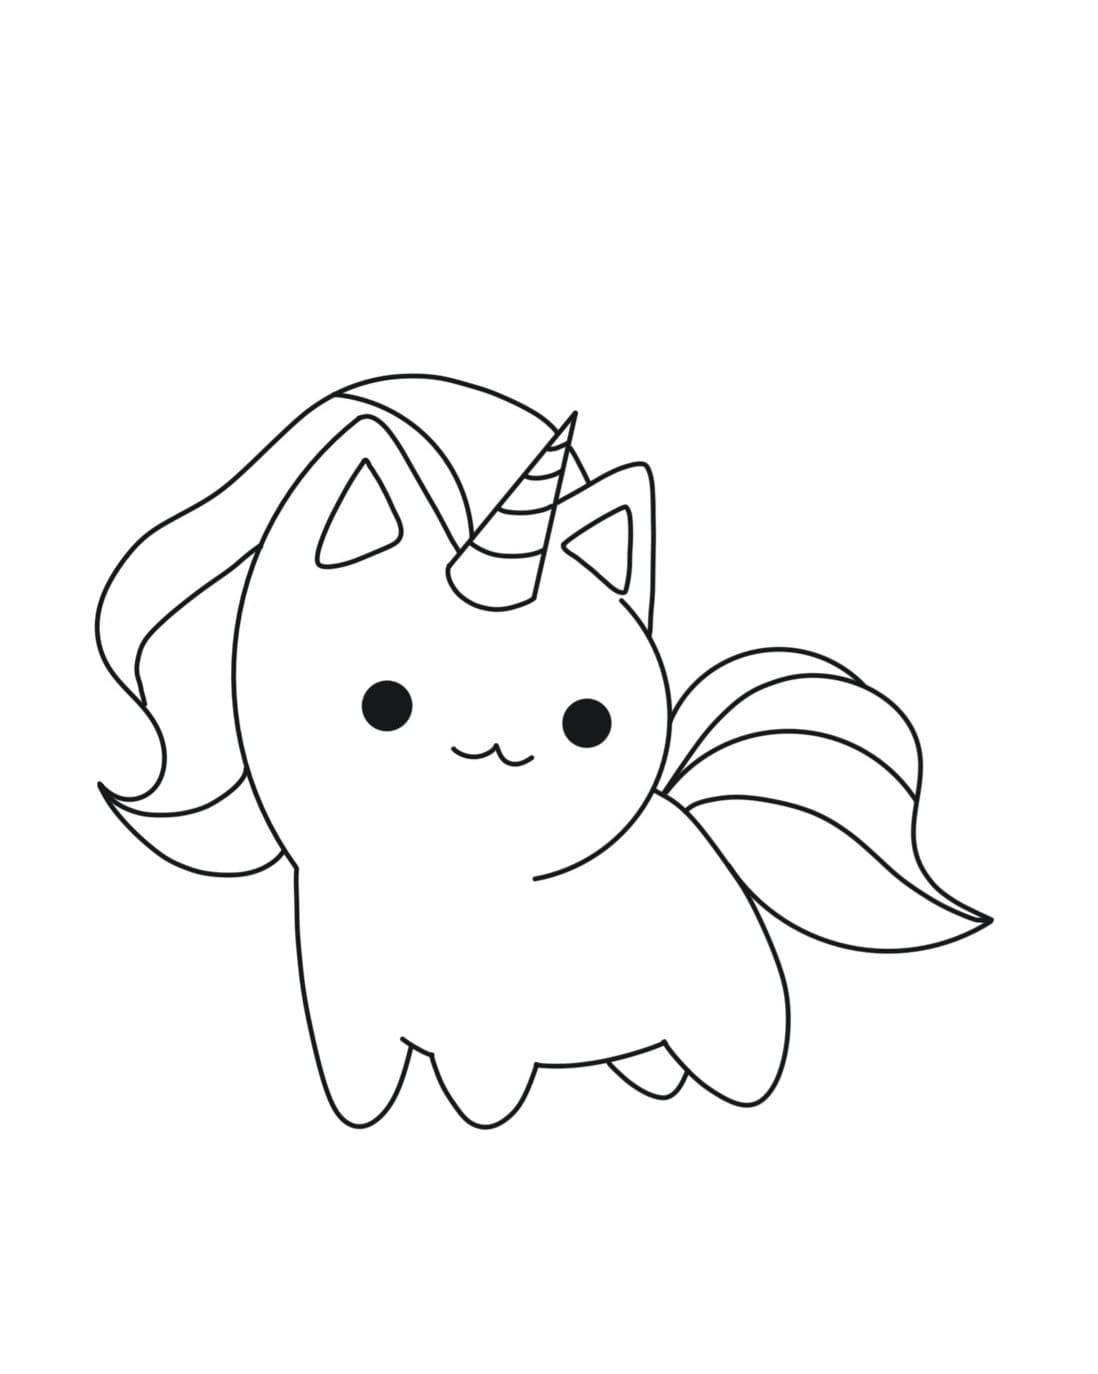 Unicorn Beautiful Cat Icon Coloring Page Graphic by eyeaglestudio